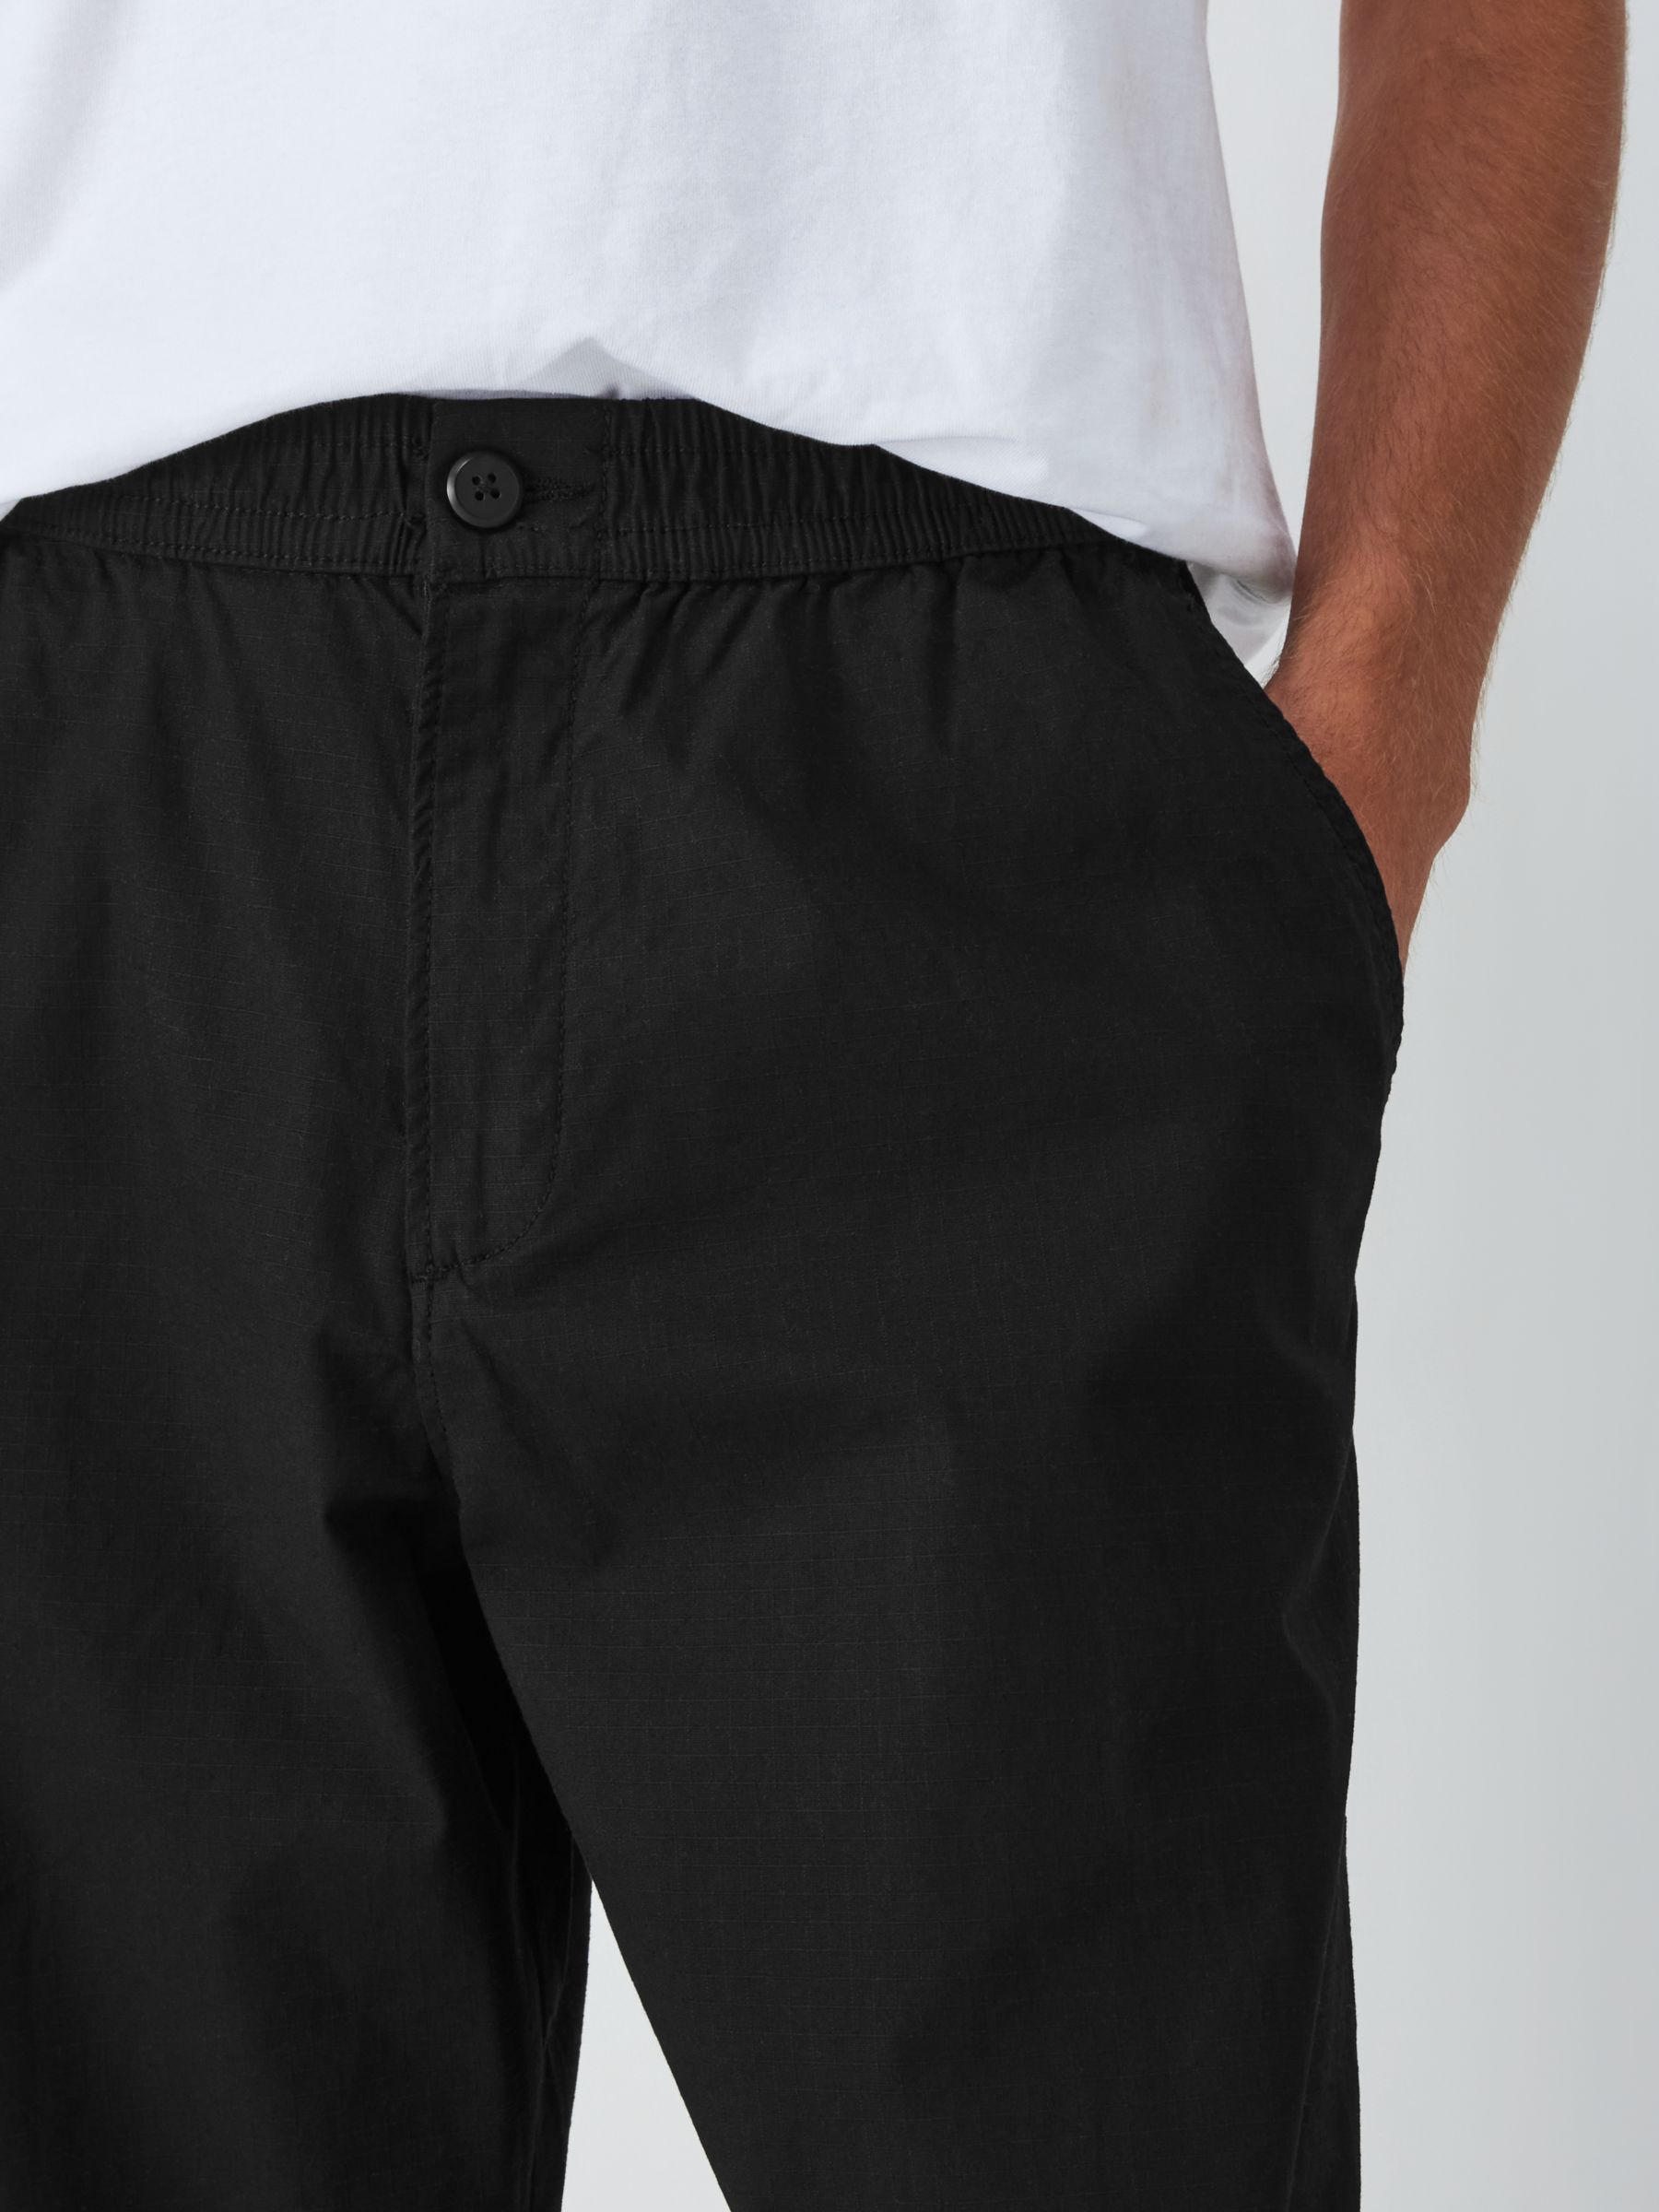 Nike Yoga loose fit trousers with tie detail in black